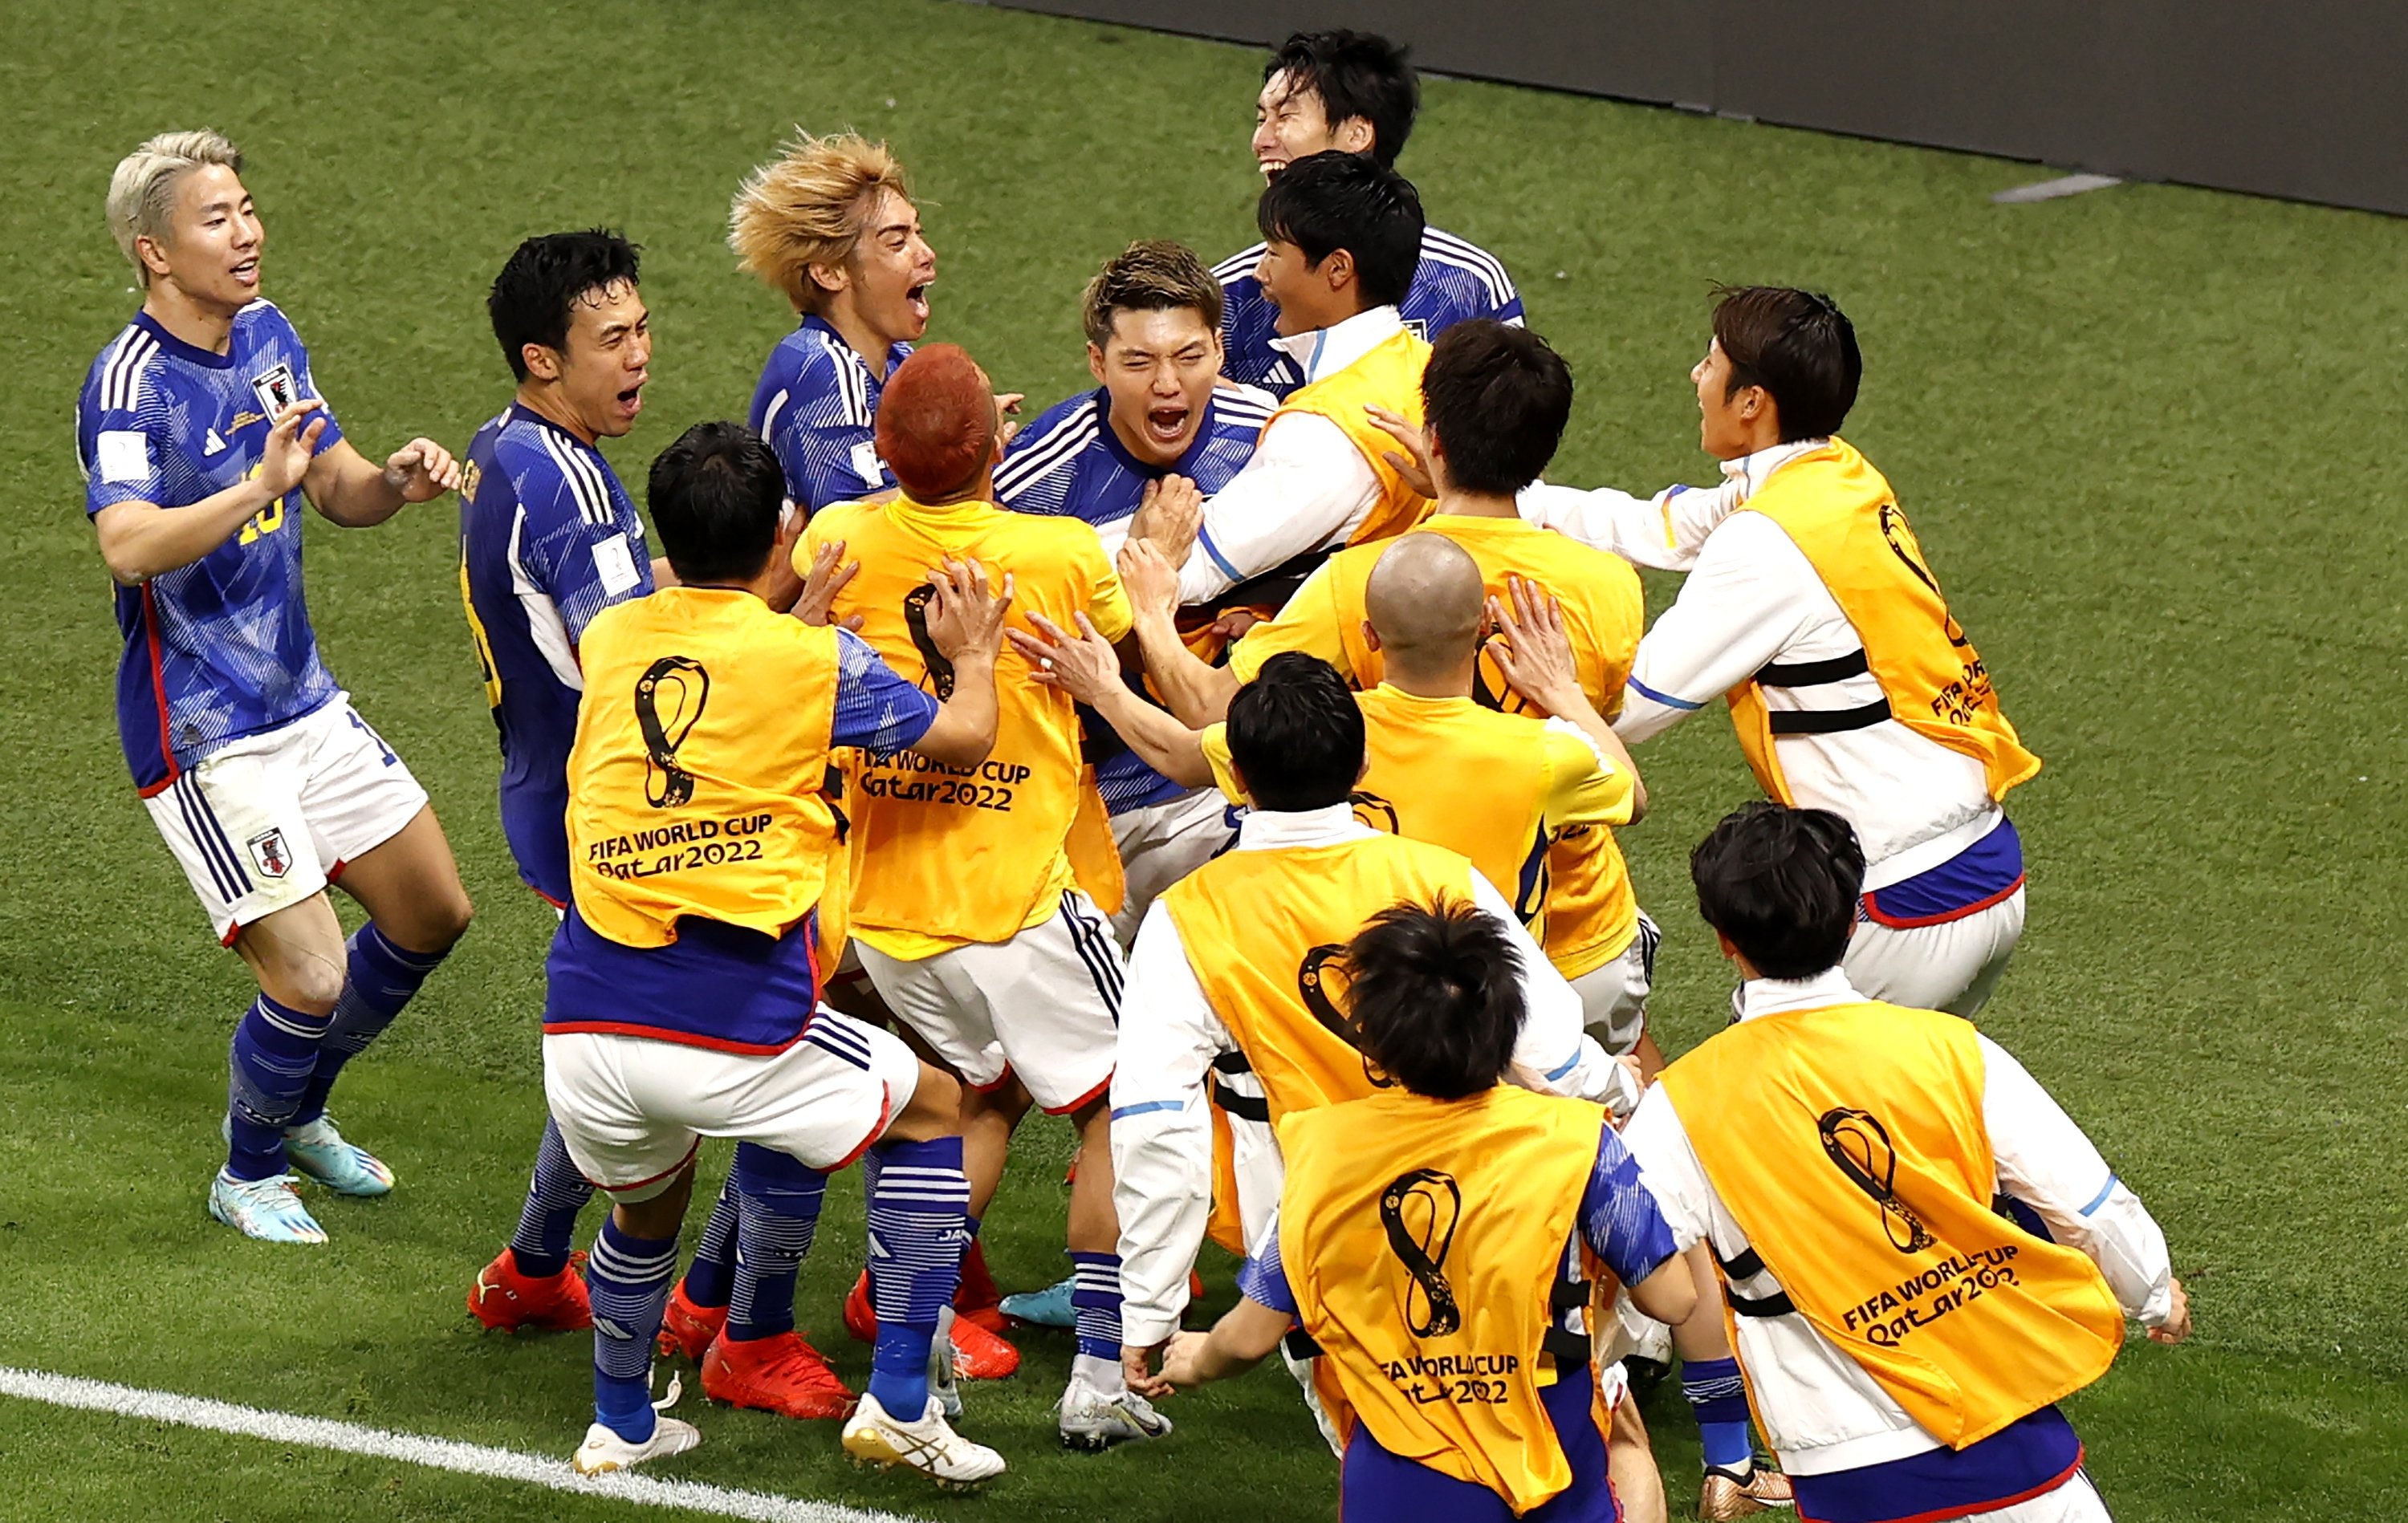 Japan-Germany World Cup match: Late goals by Doan and Asano give